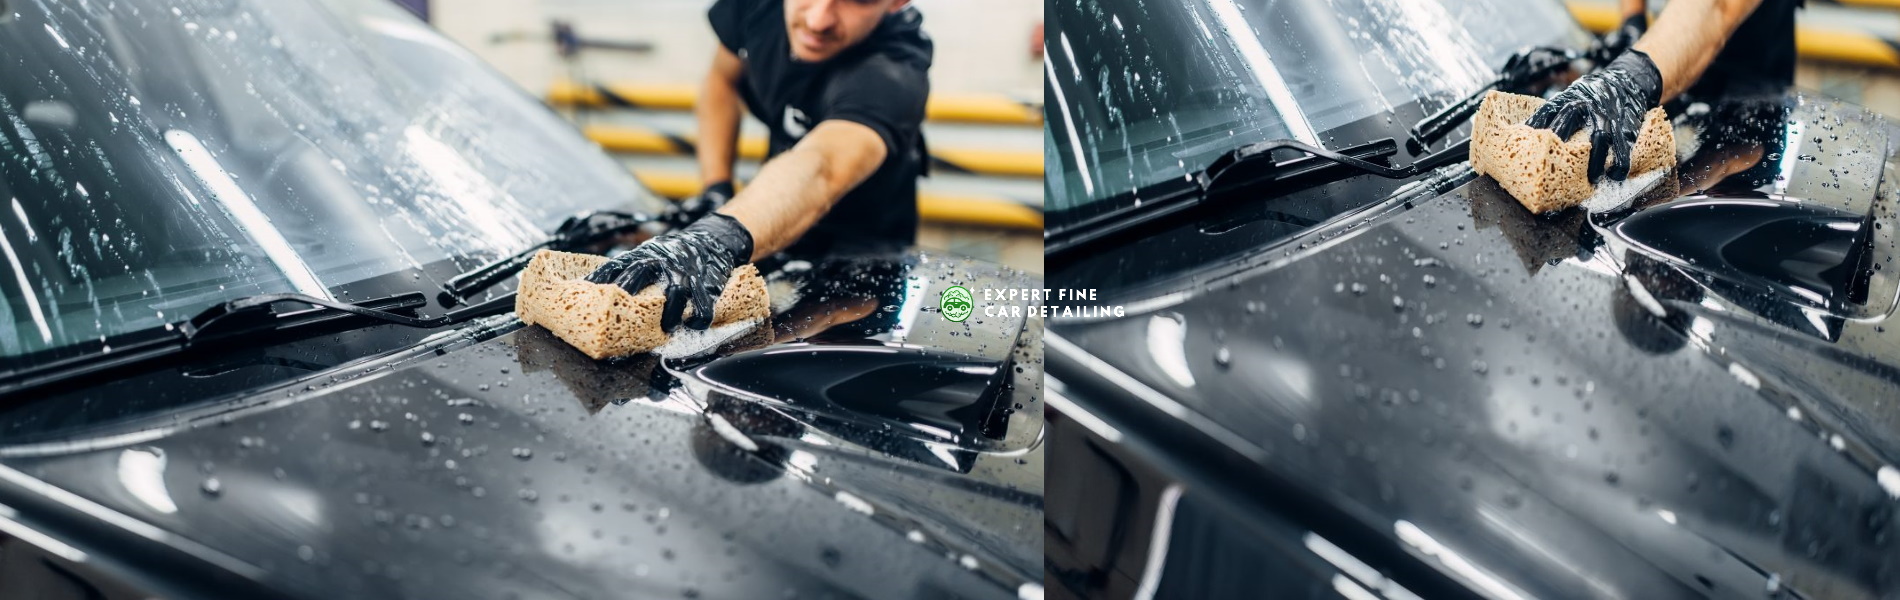 We are a premier car detailing company dedicated to providing exceptional services that elevate the appearance and condition of your vehicle. With our meticulous attention to detail, cutting-edge techniques, and high-quality products, we guarantee a profe